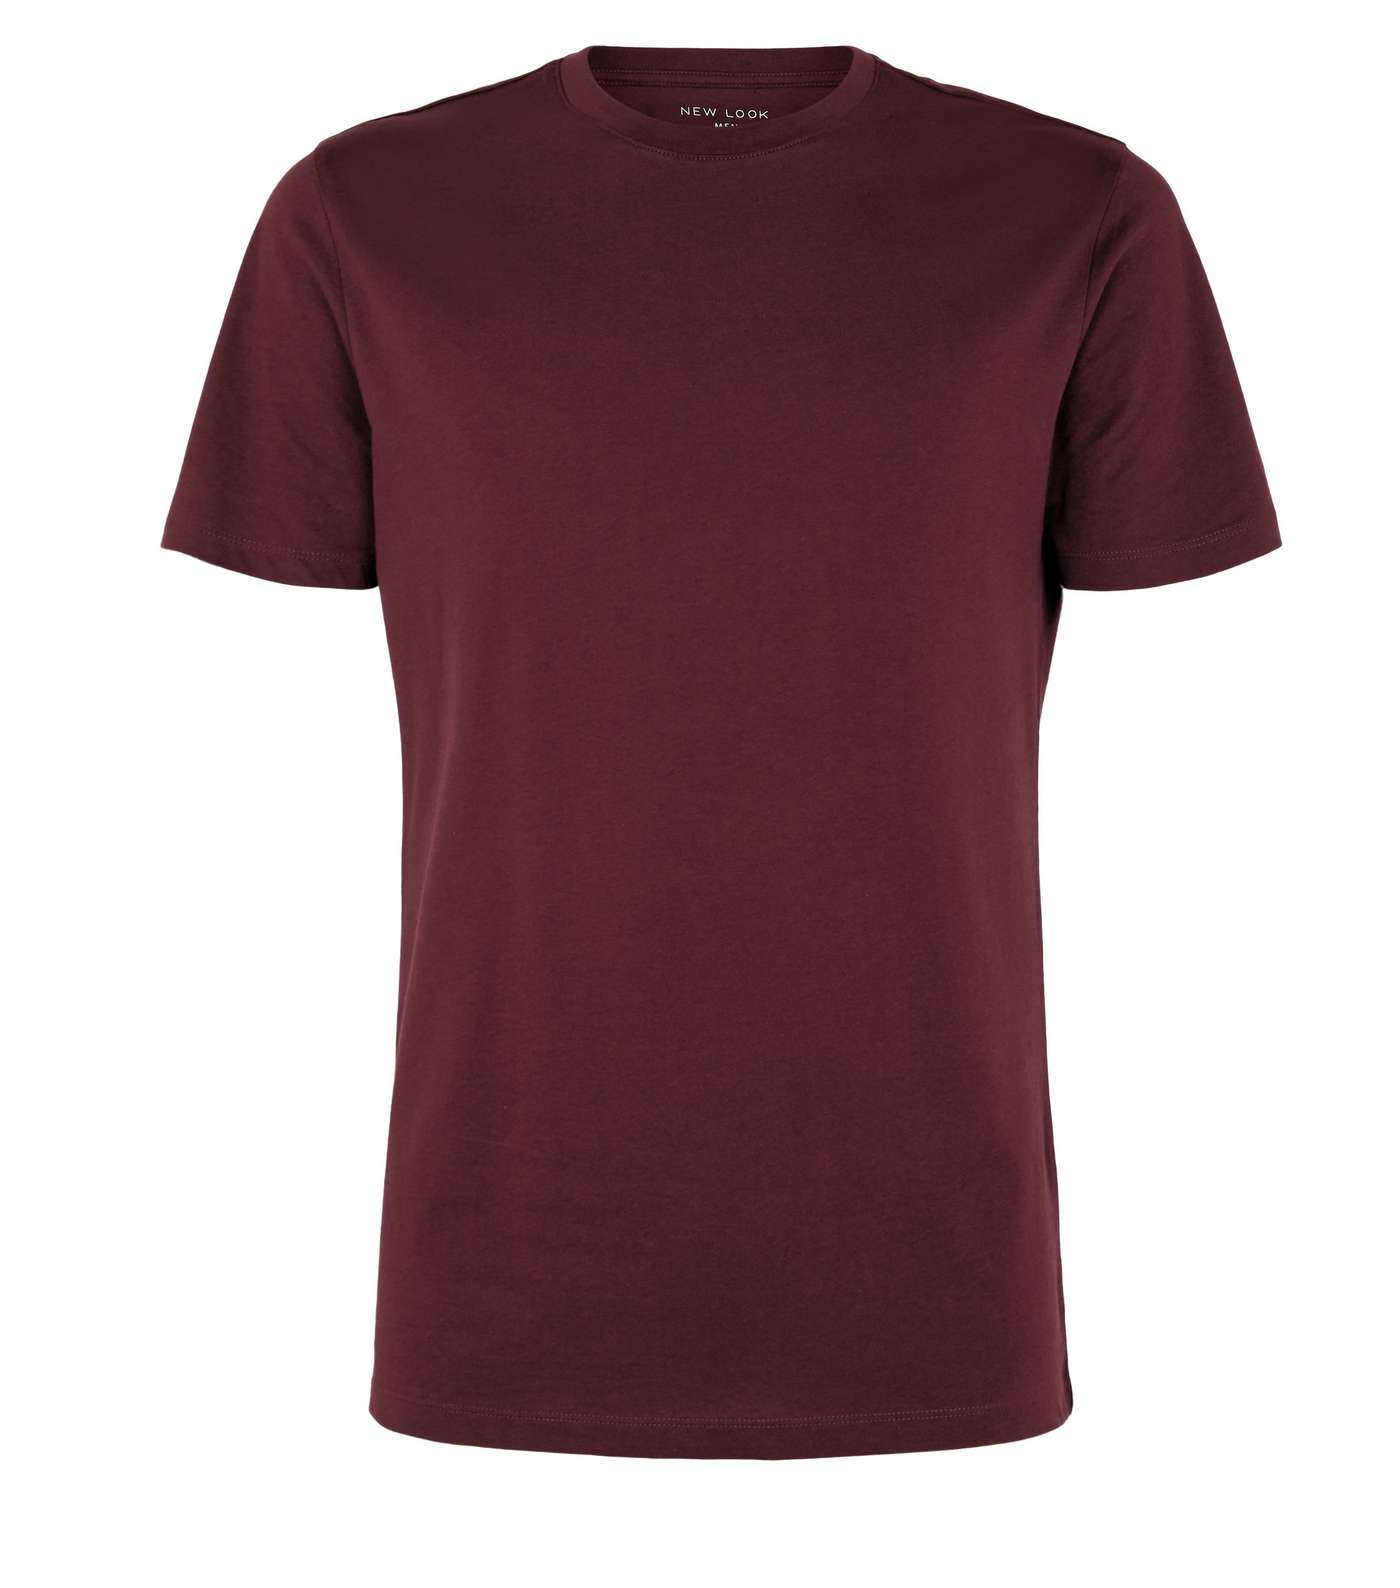 Burgundy Crew Neck Muscle Fit T-Shirt Image 4